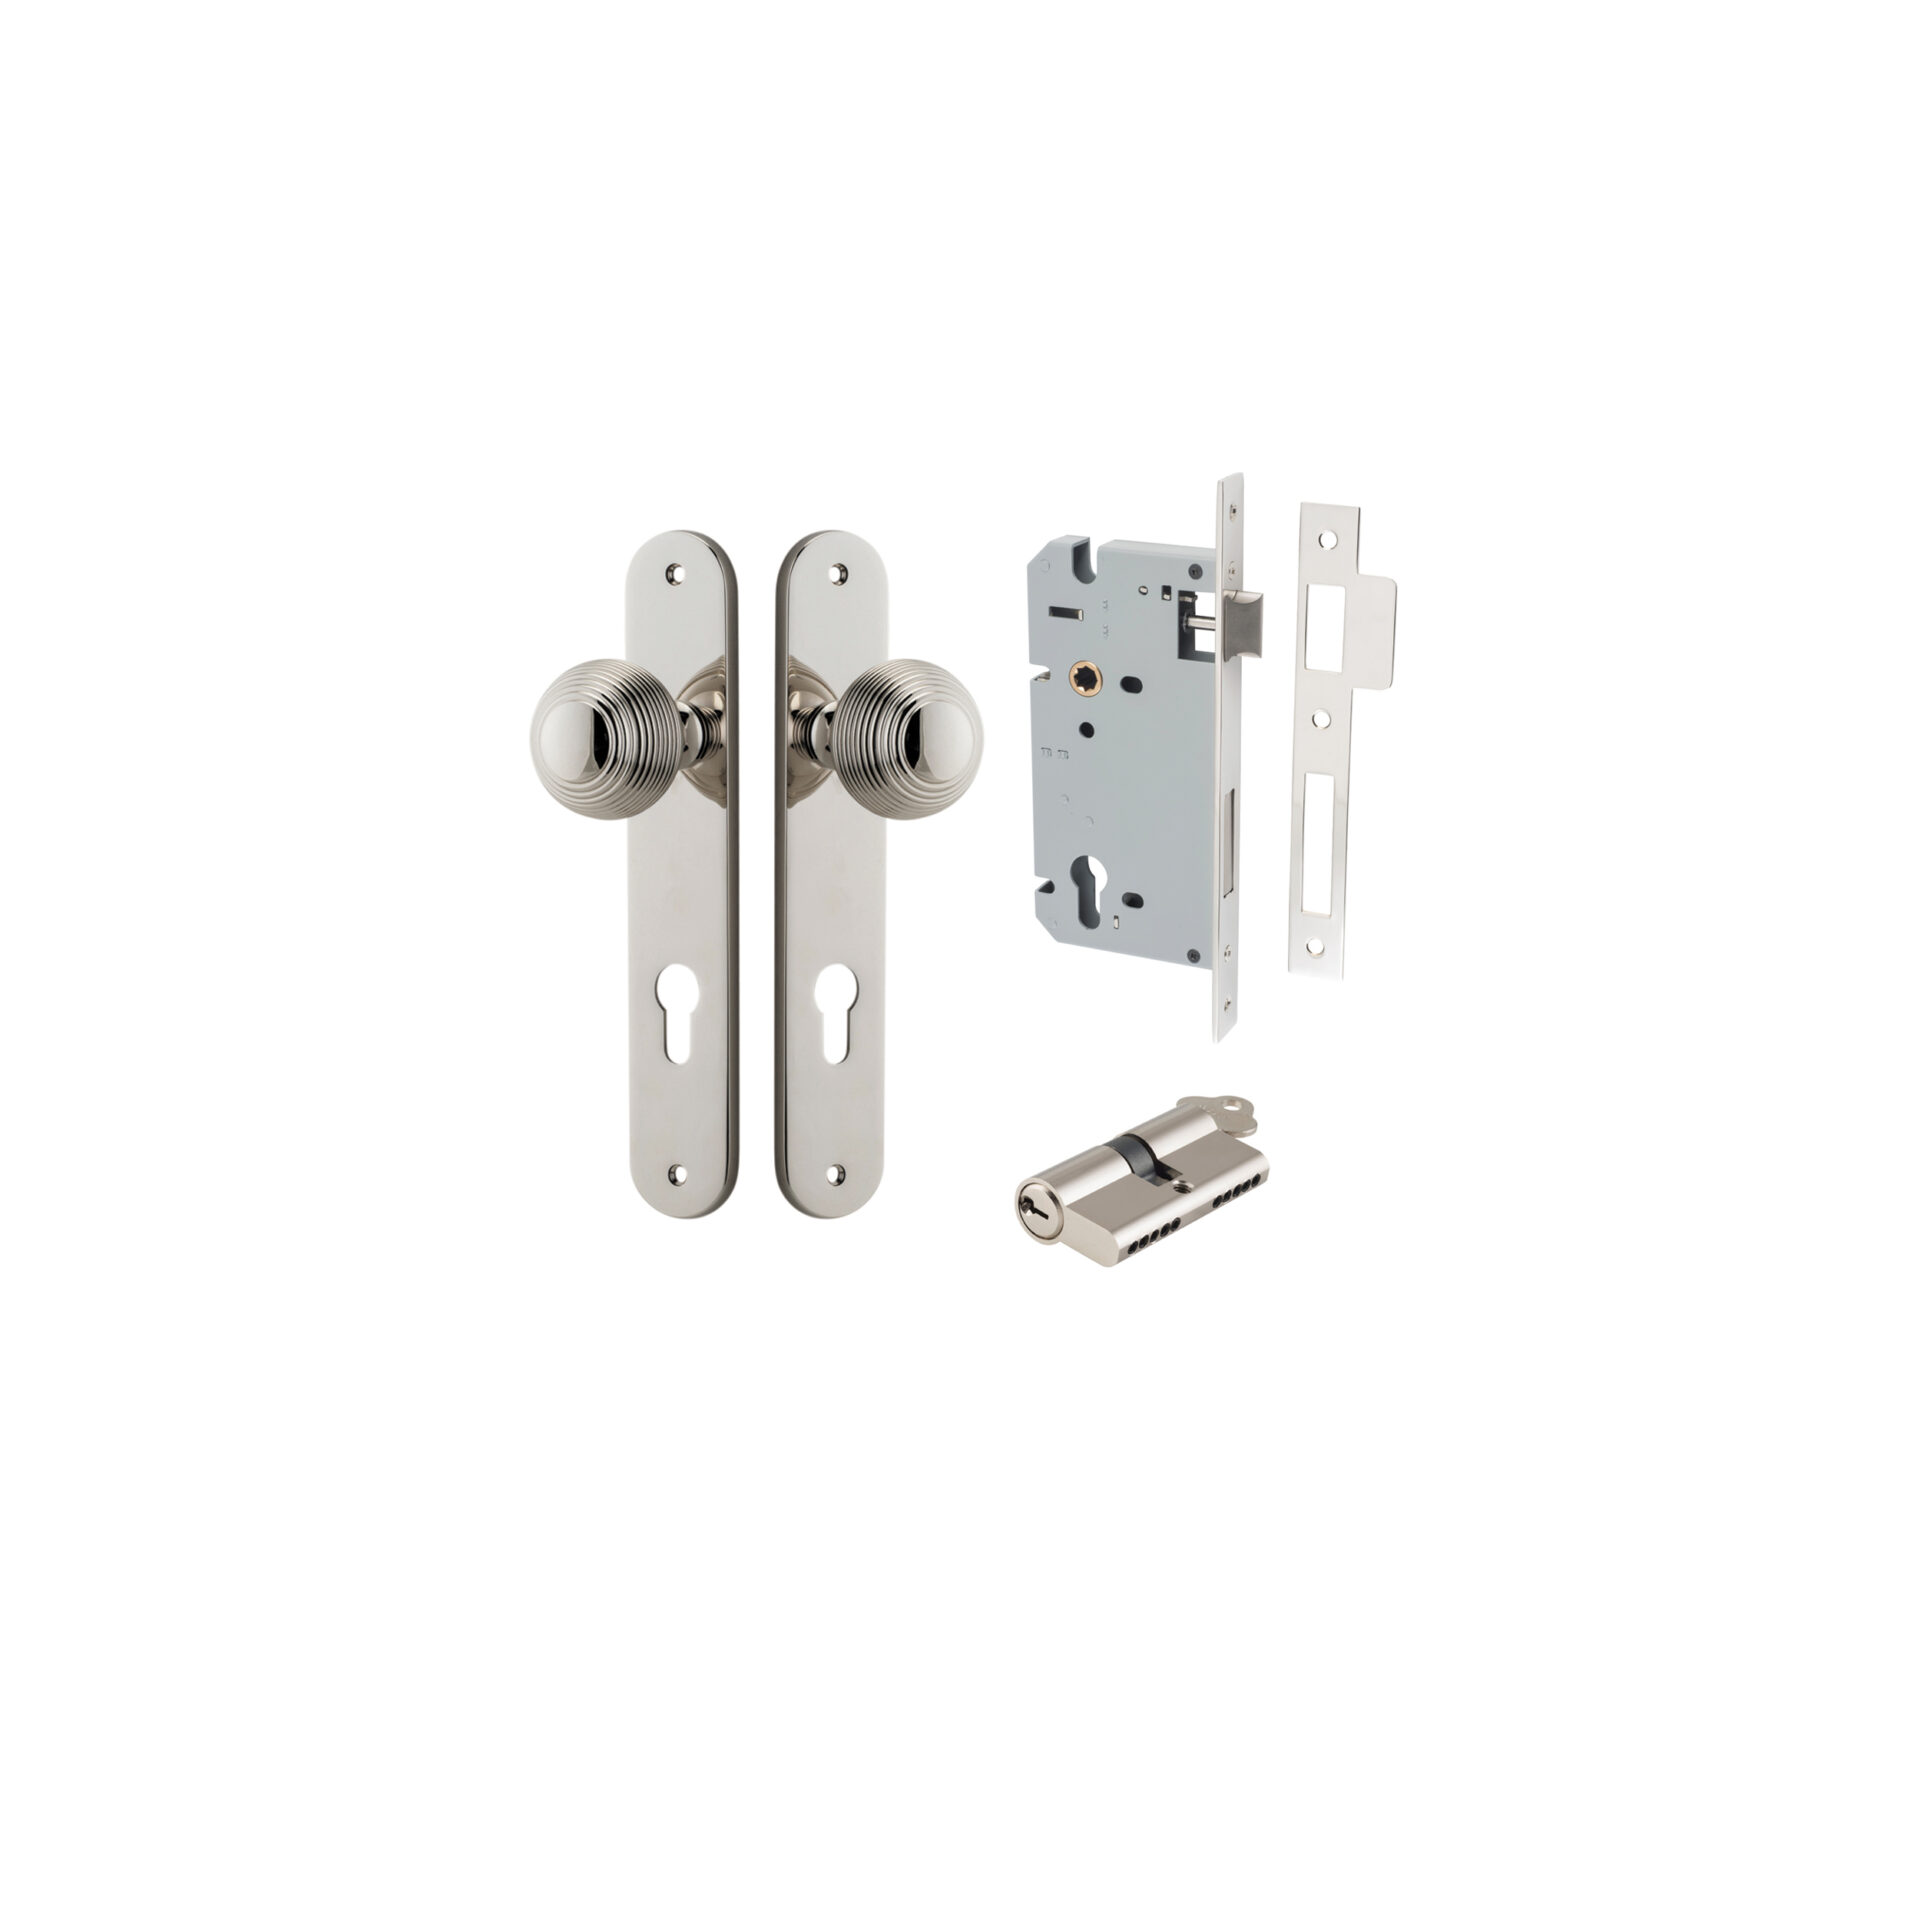 Guildford Knob - Oval Backplate Entrance Kit with High Security Lock